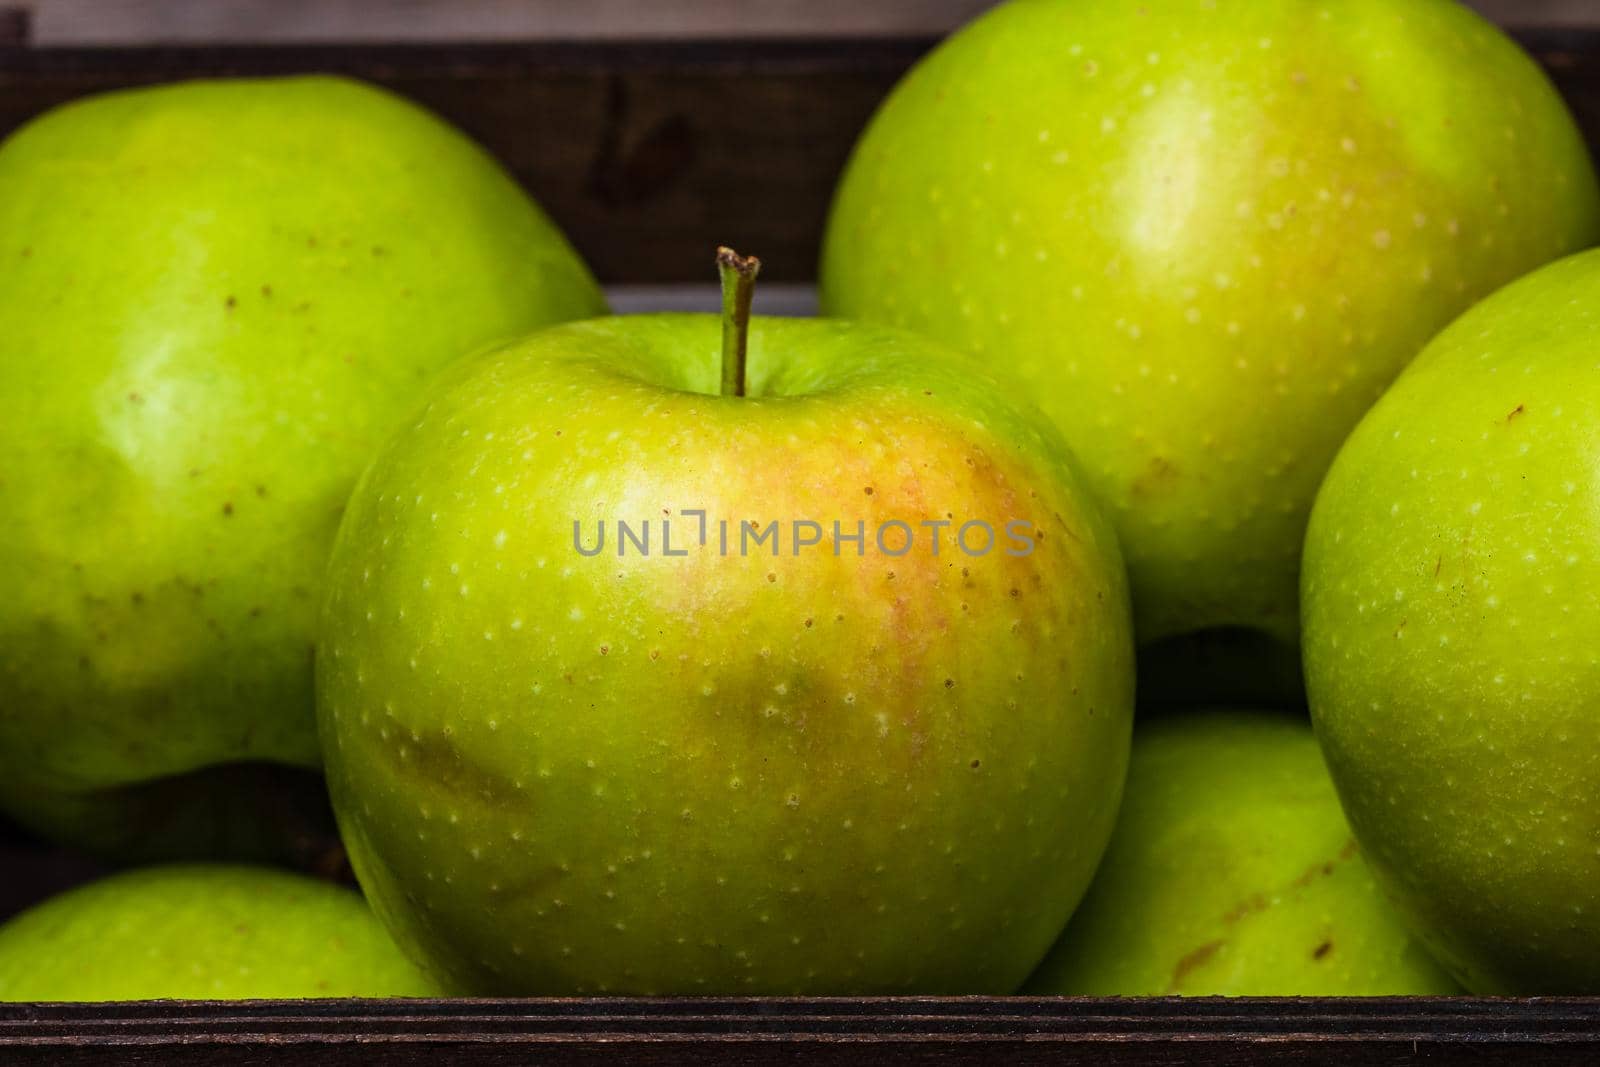  Ripe green apples in a wooden crate, close up isolated. by vladispas